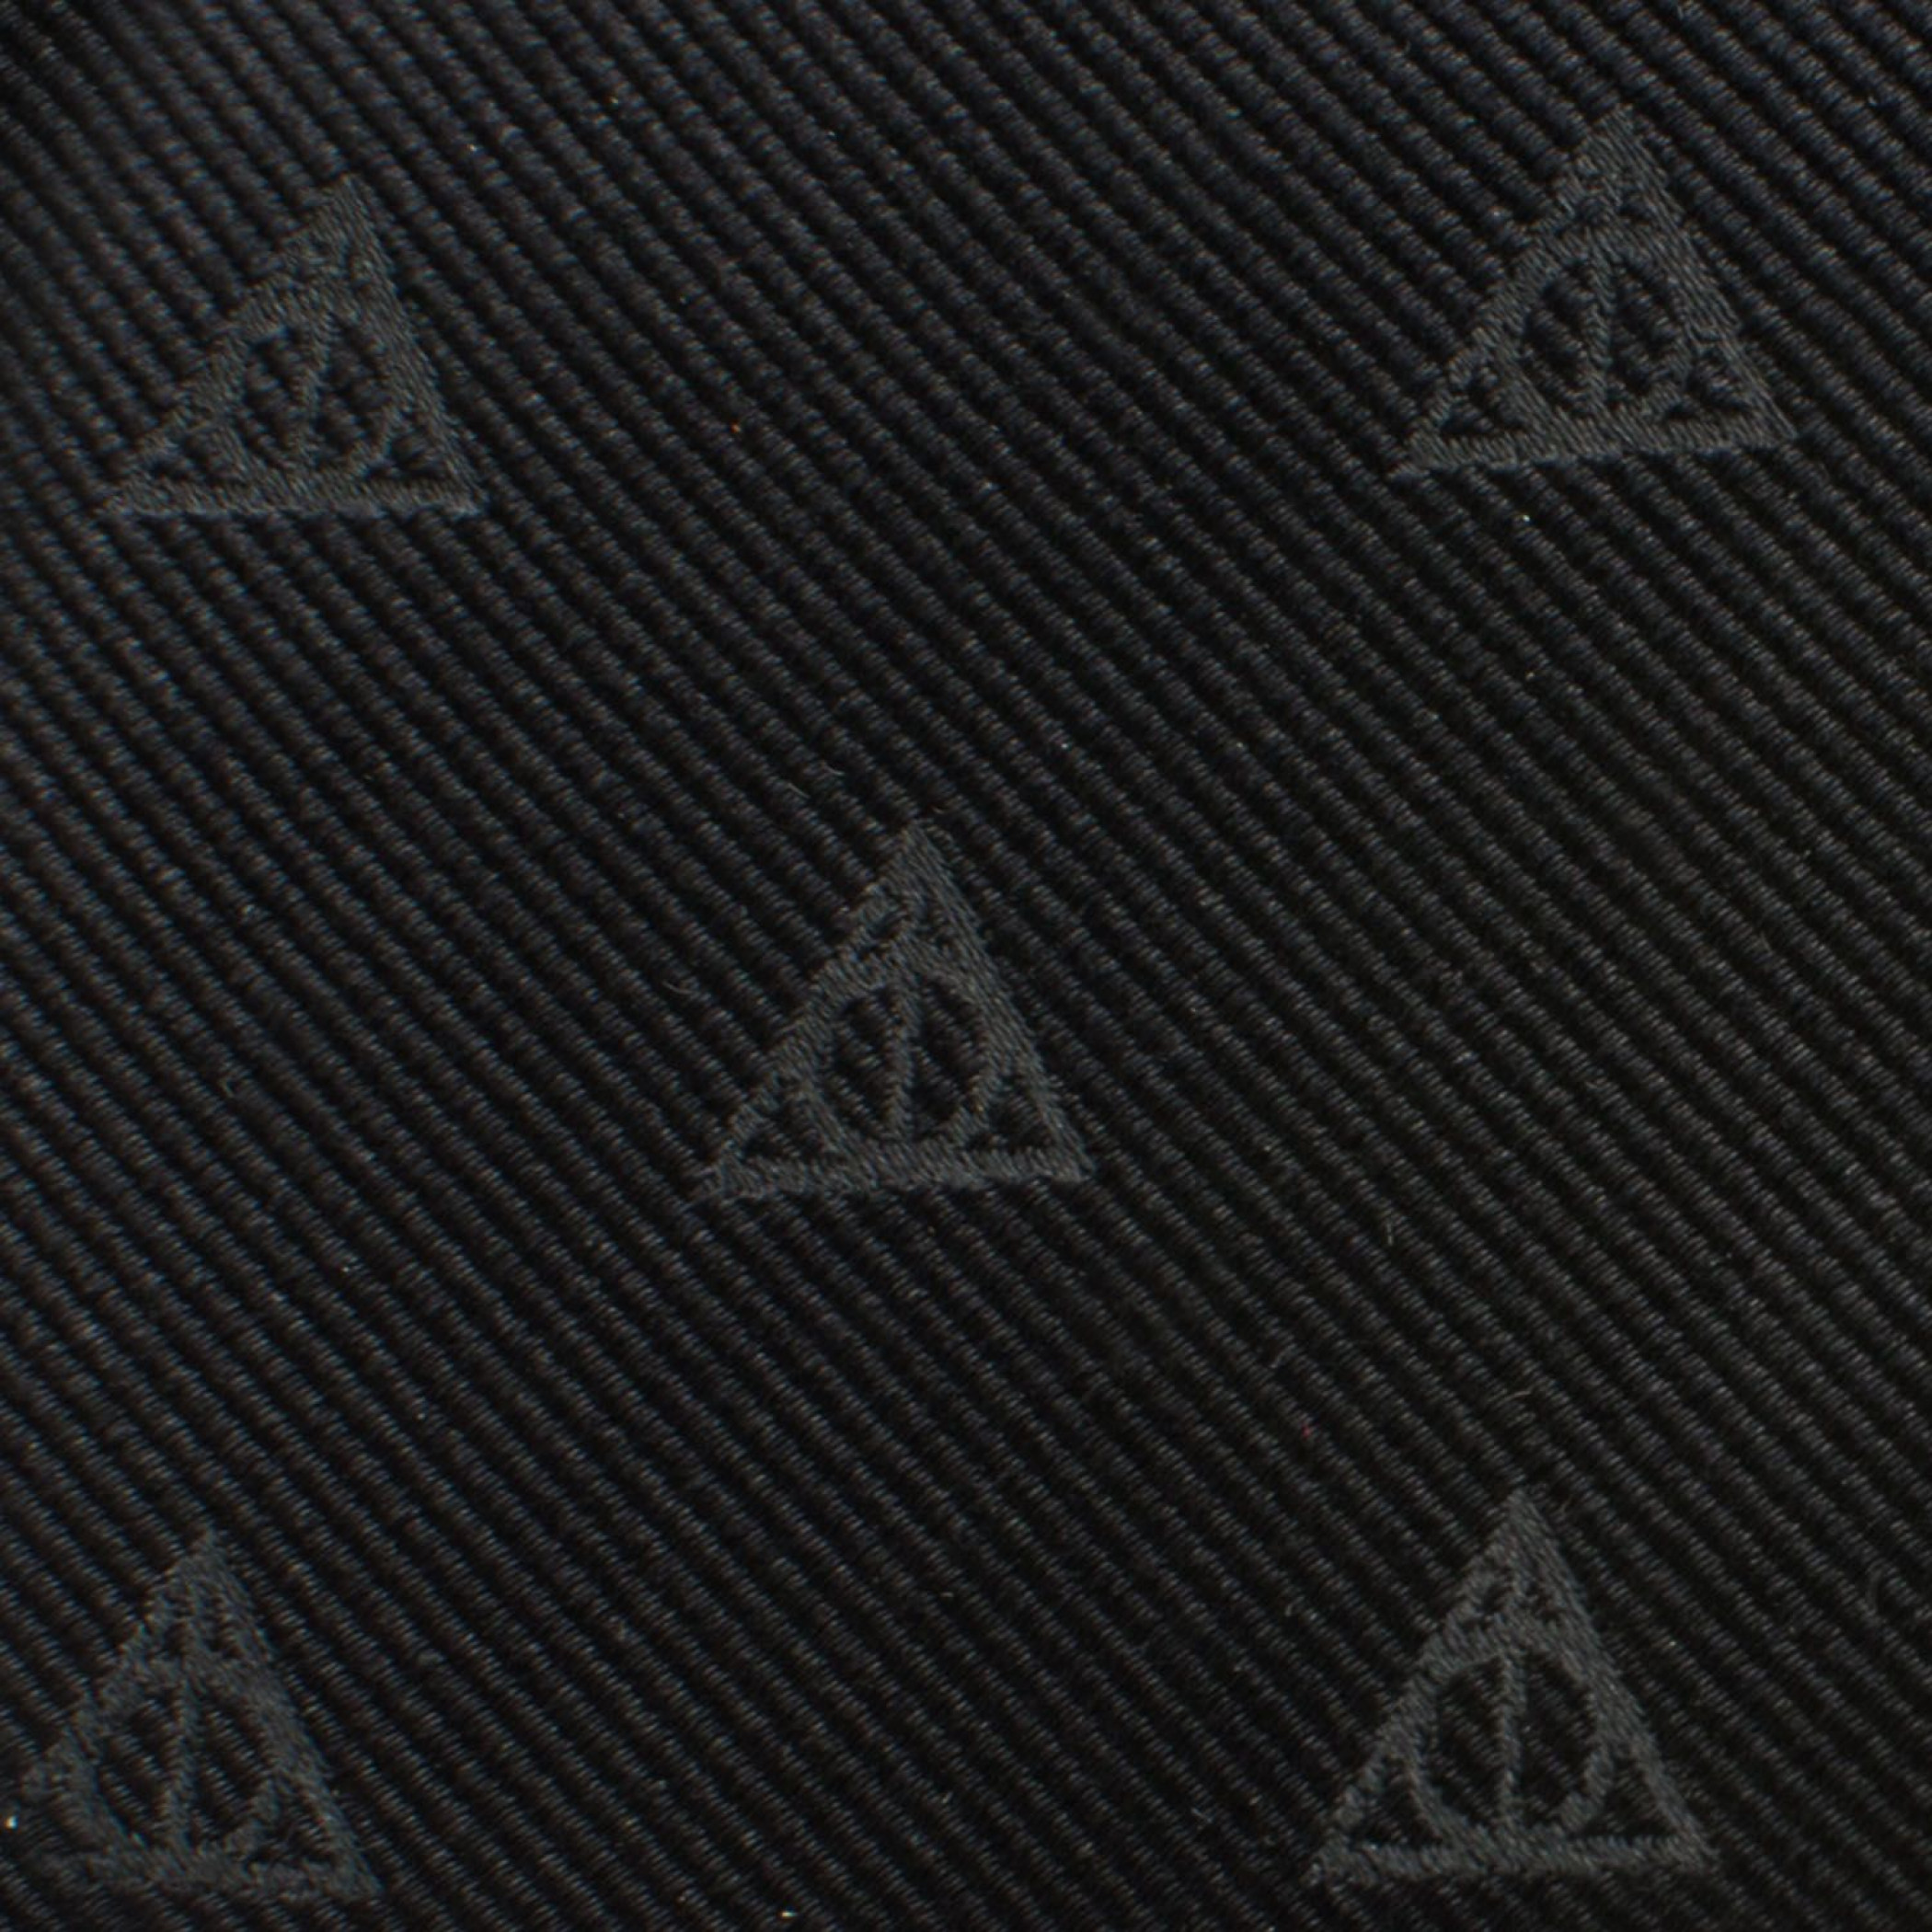 Harry Potter and the Deathly Hallows Silk Tie